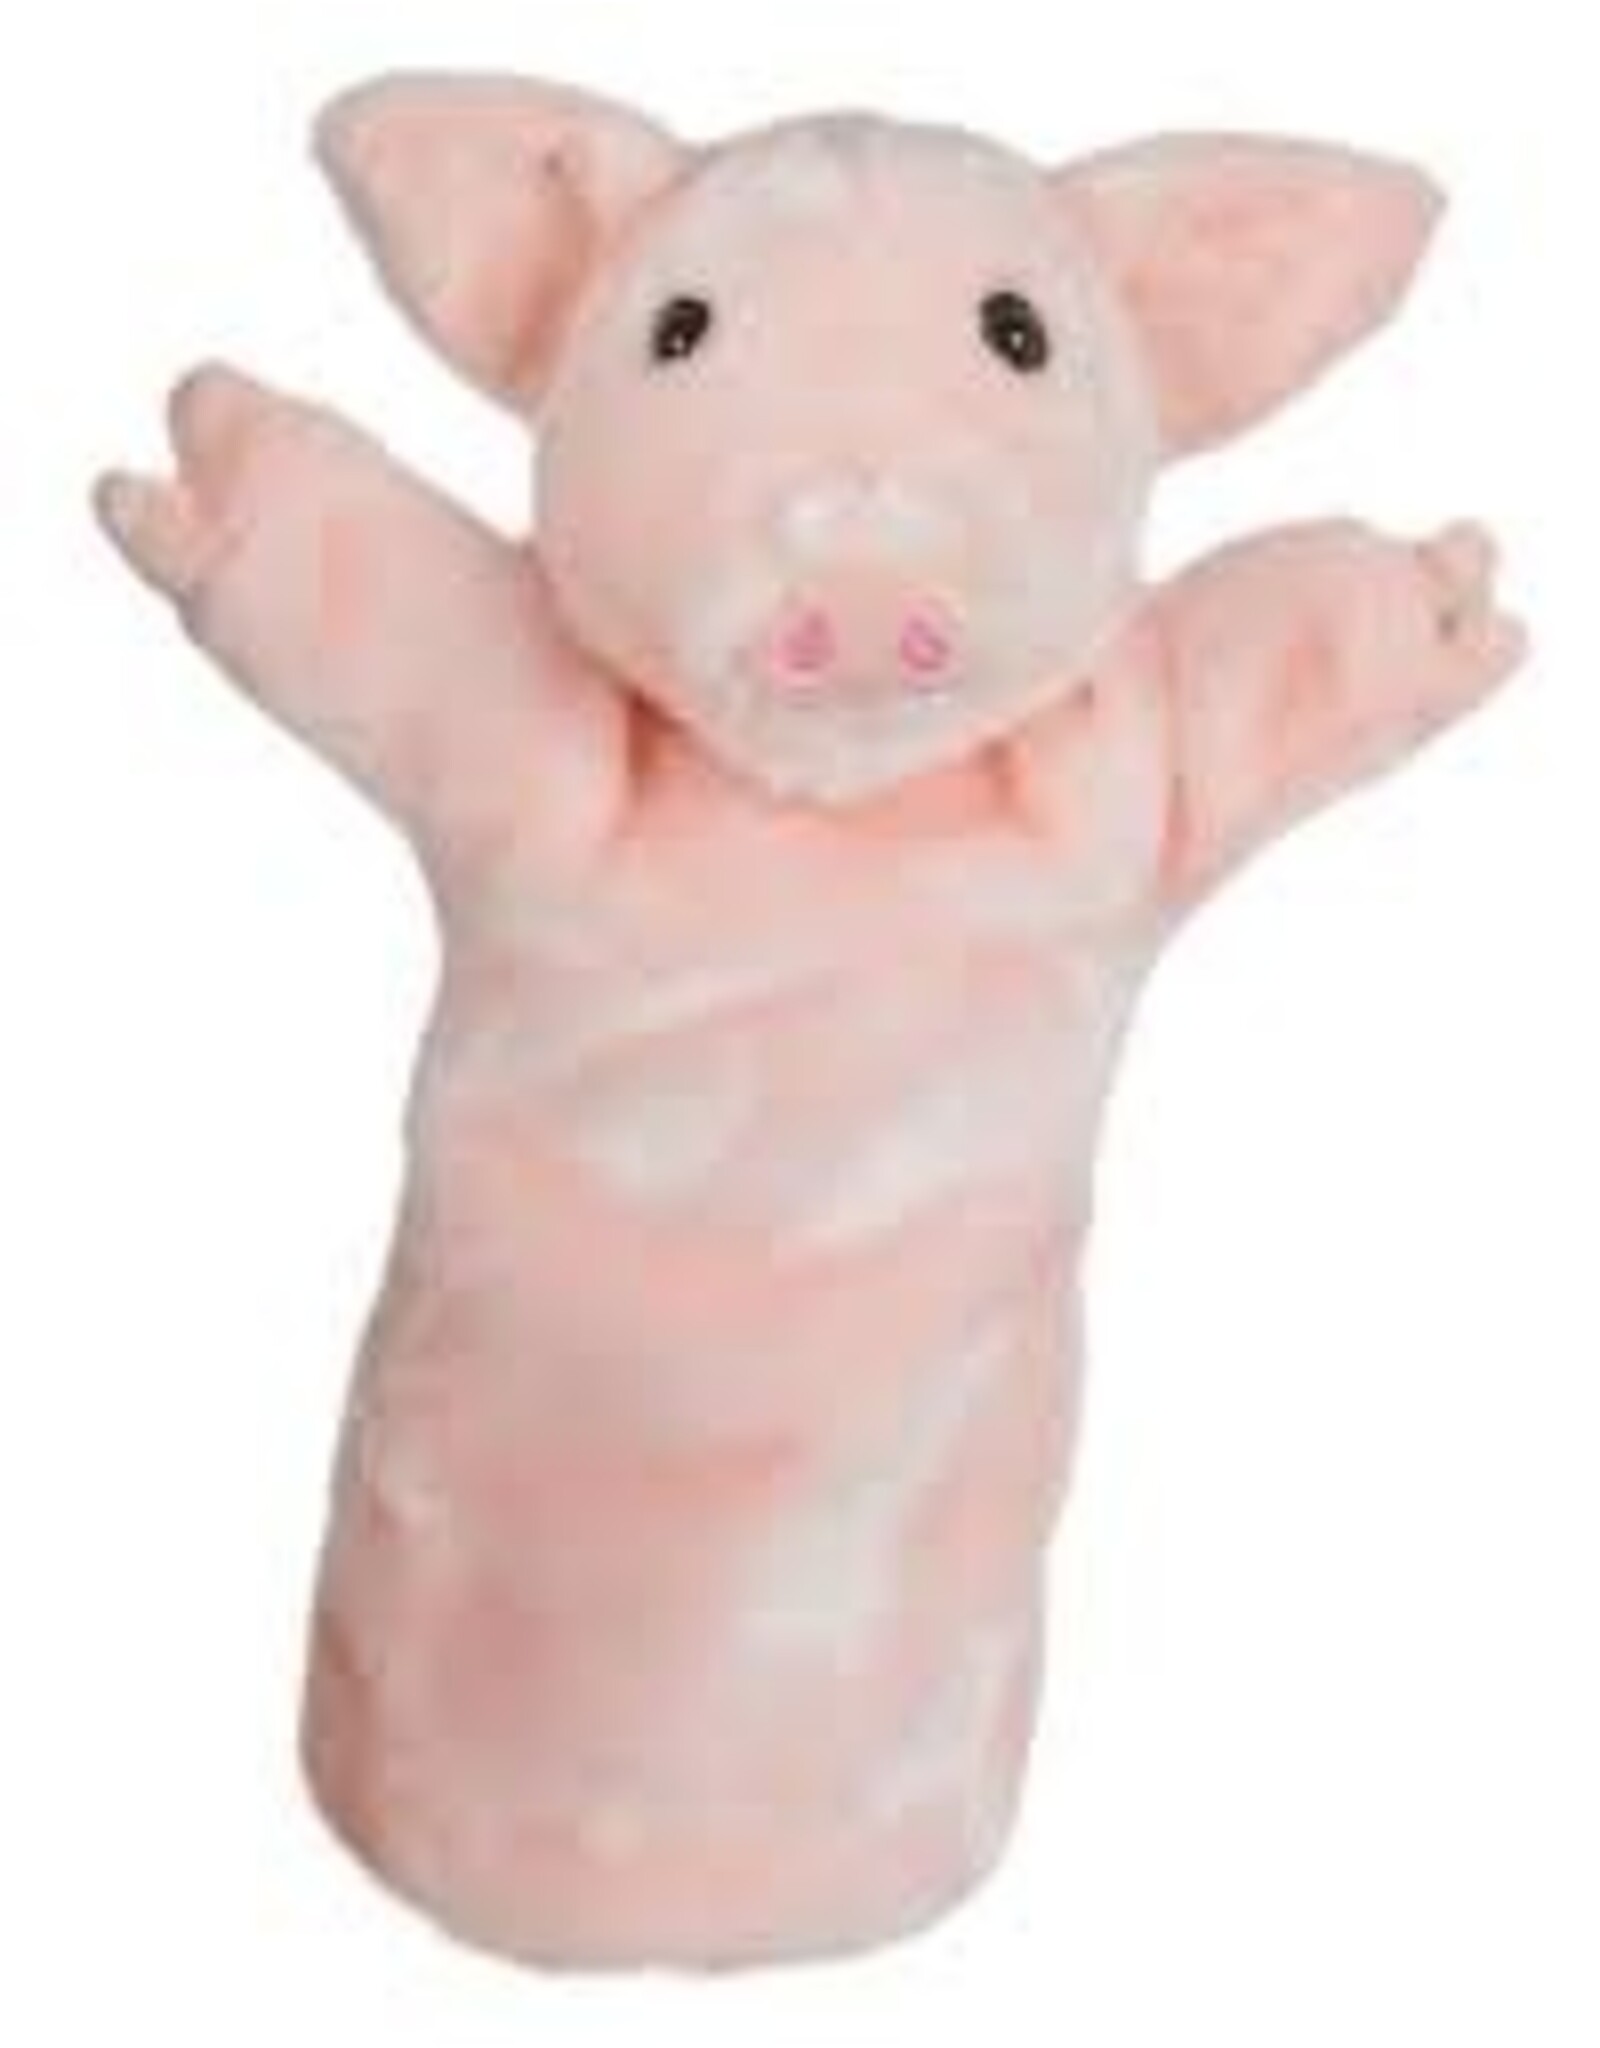 Long Sleeved Glove Puppets: Pig